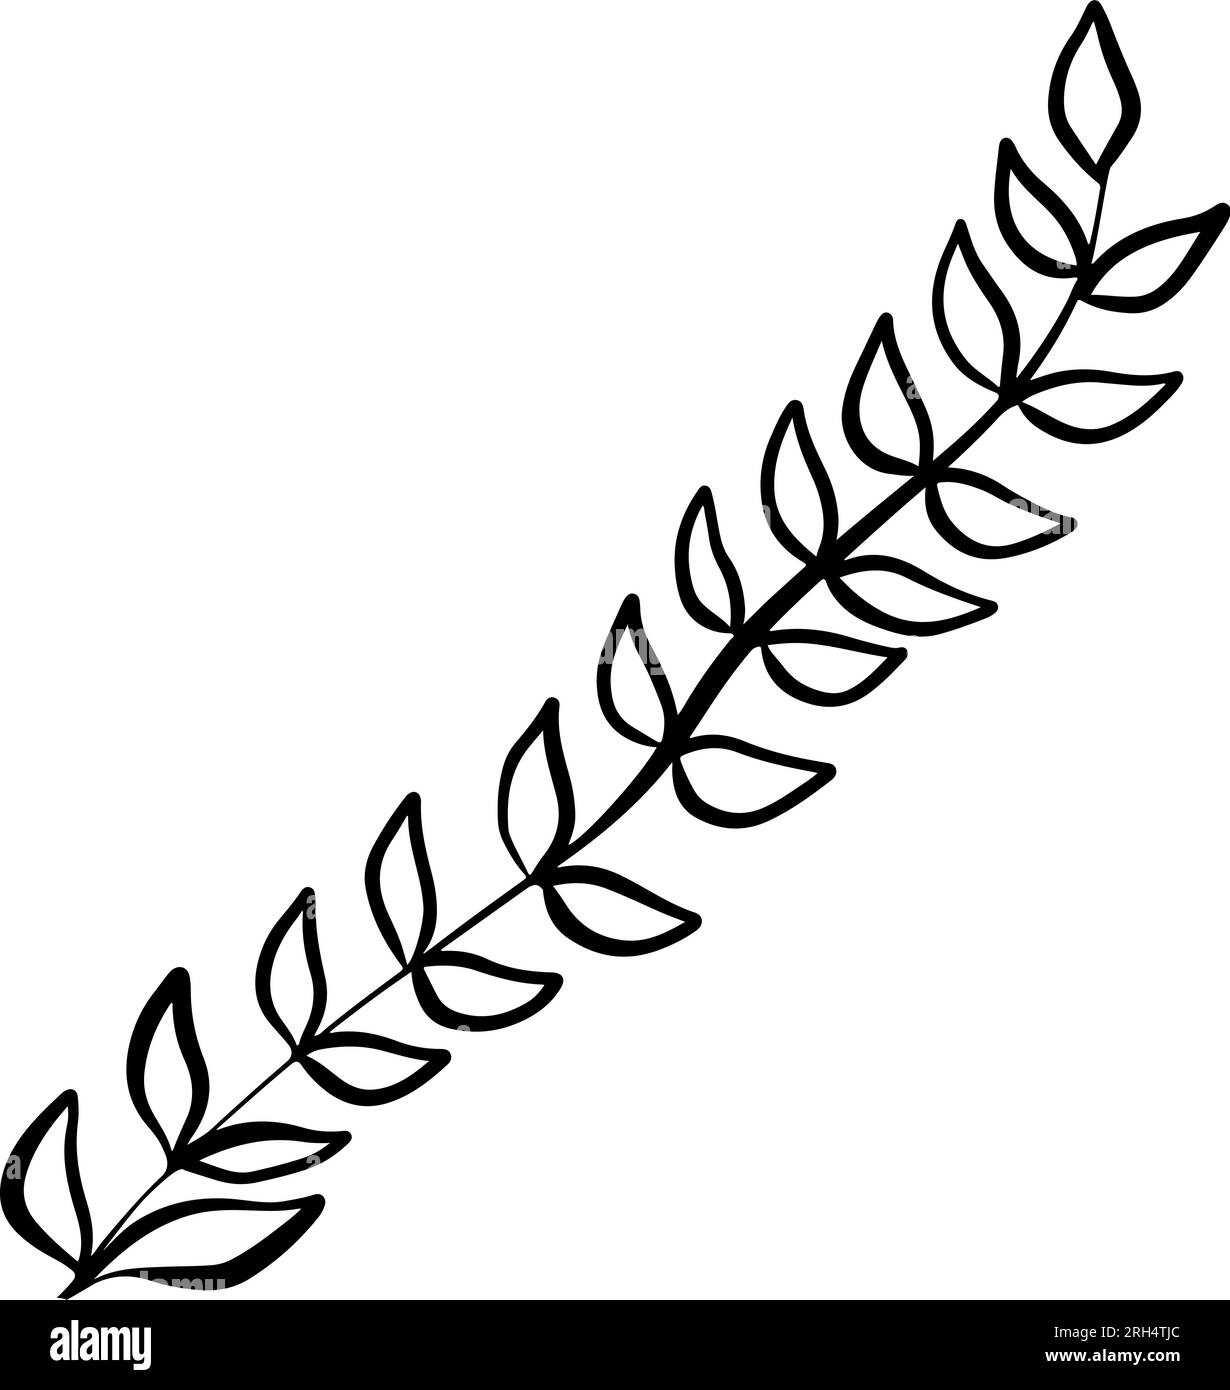 Simple Way To Draw A Leaf - YouTube